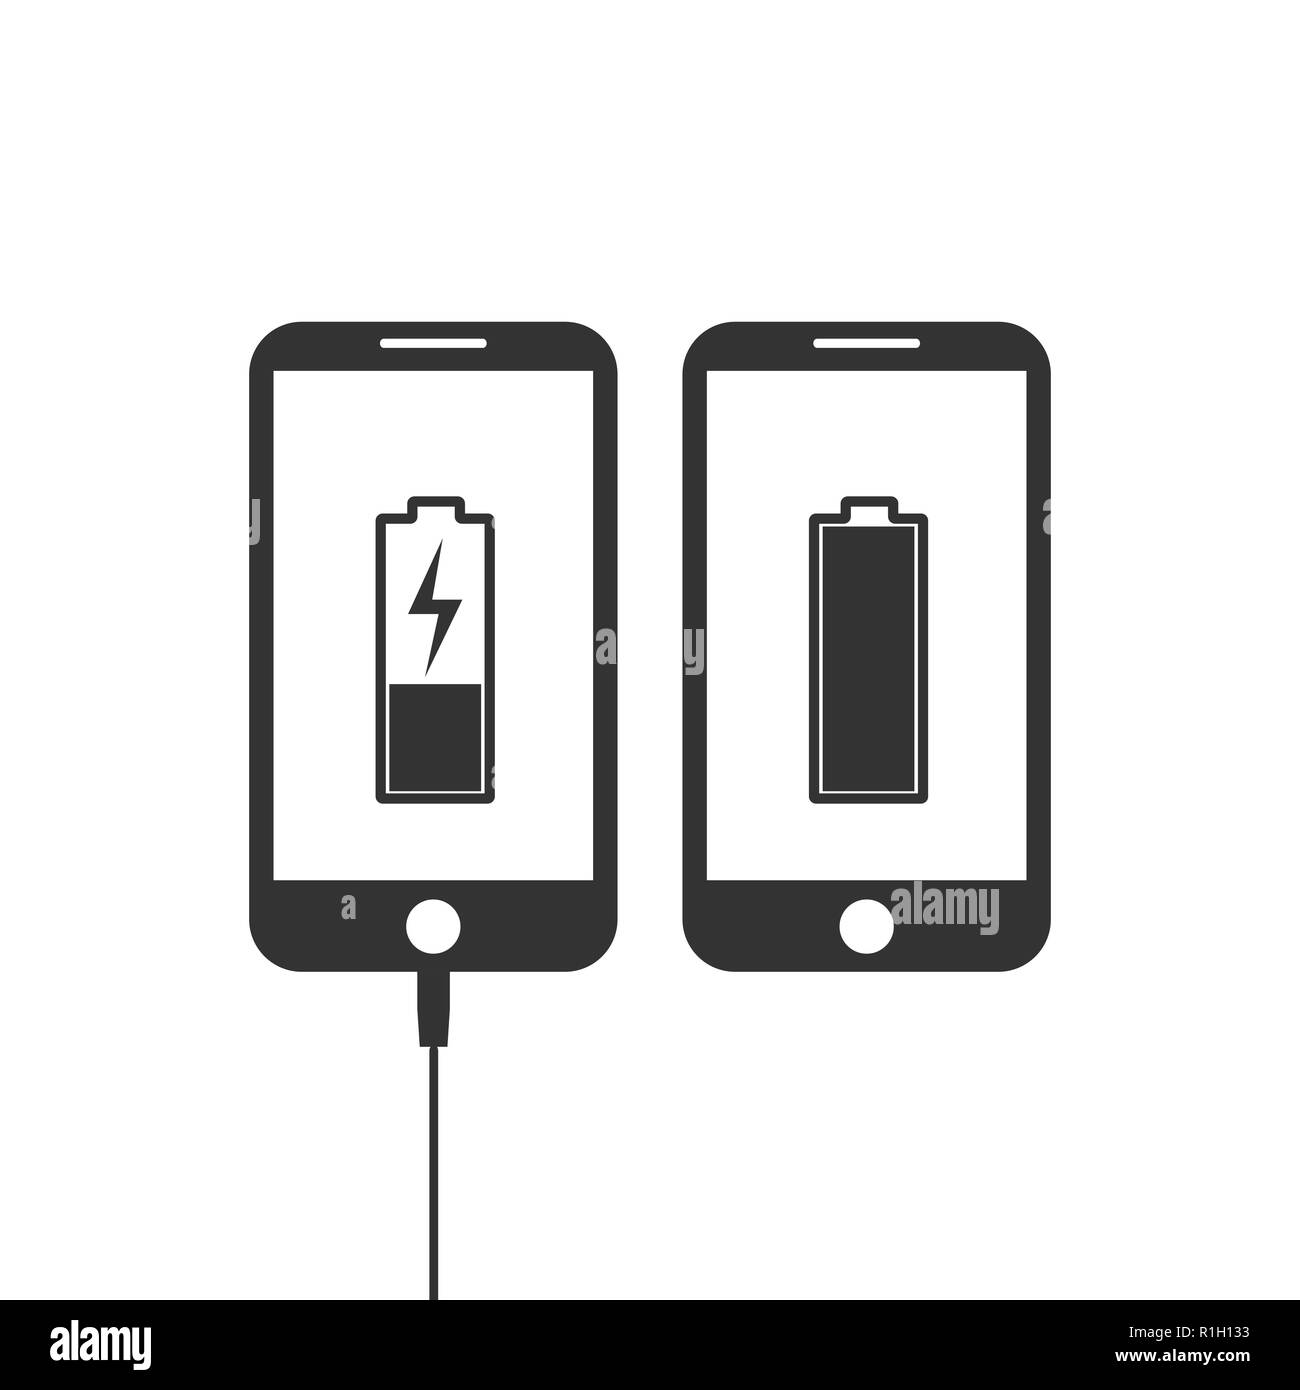 Phone on charge icon. Battery load icon. Vector illustration. Flat Stock Vector